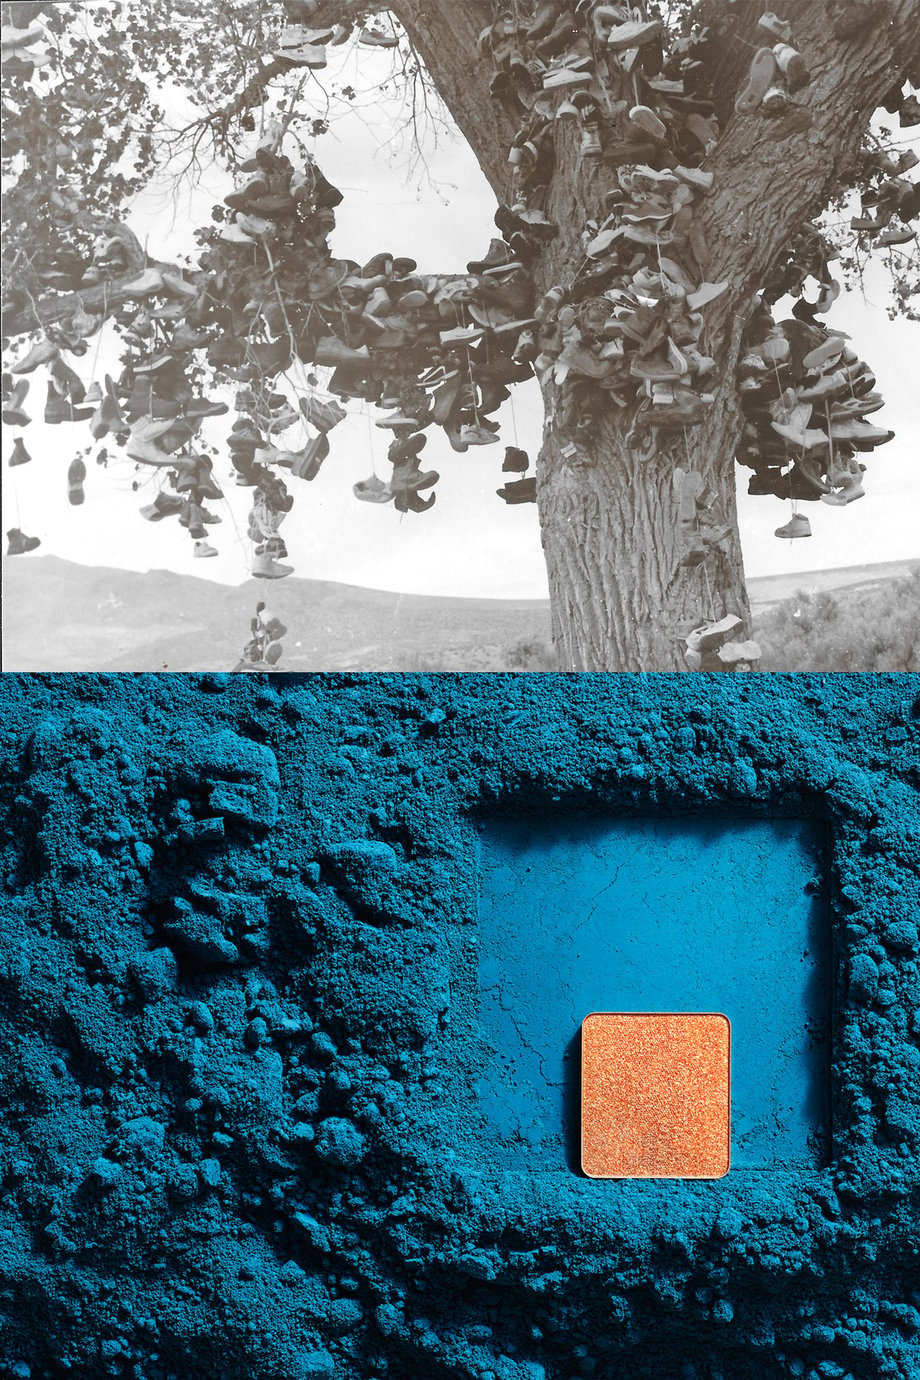 The top of Dan's photo contrasts a black and white tree against the lower half of bright blue cosmetic powder with orange inlay